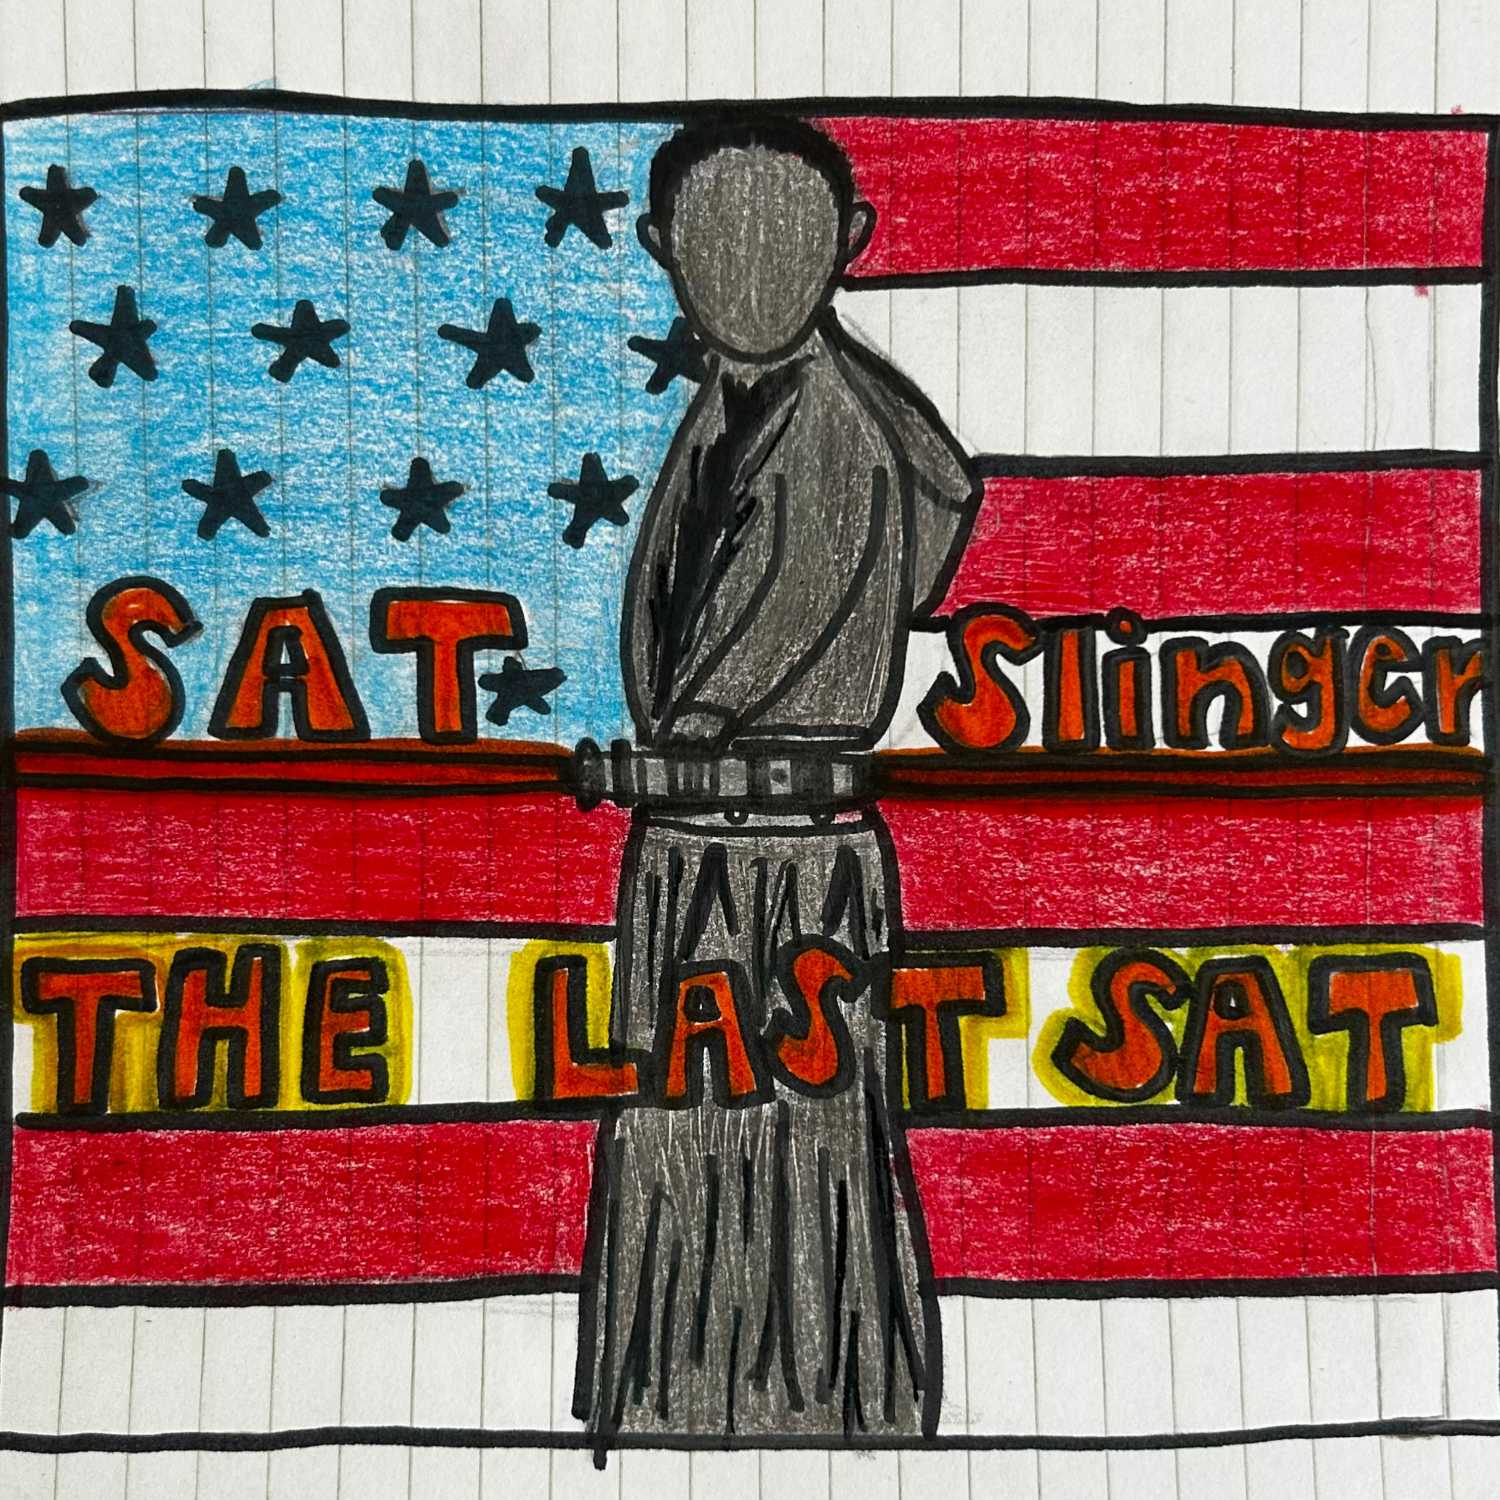 Fate of the Sats